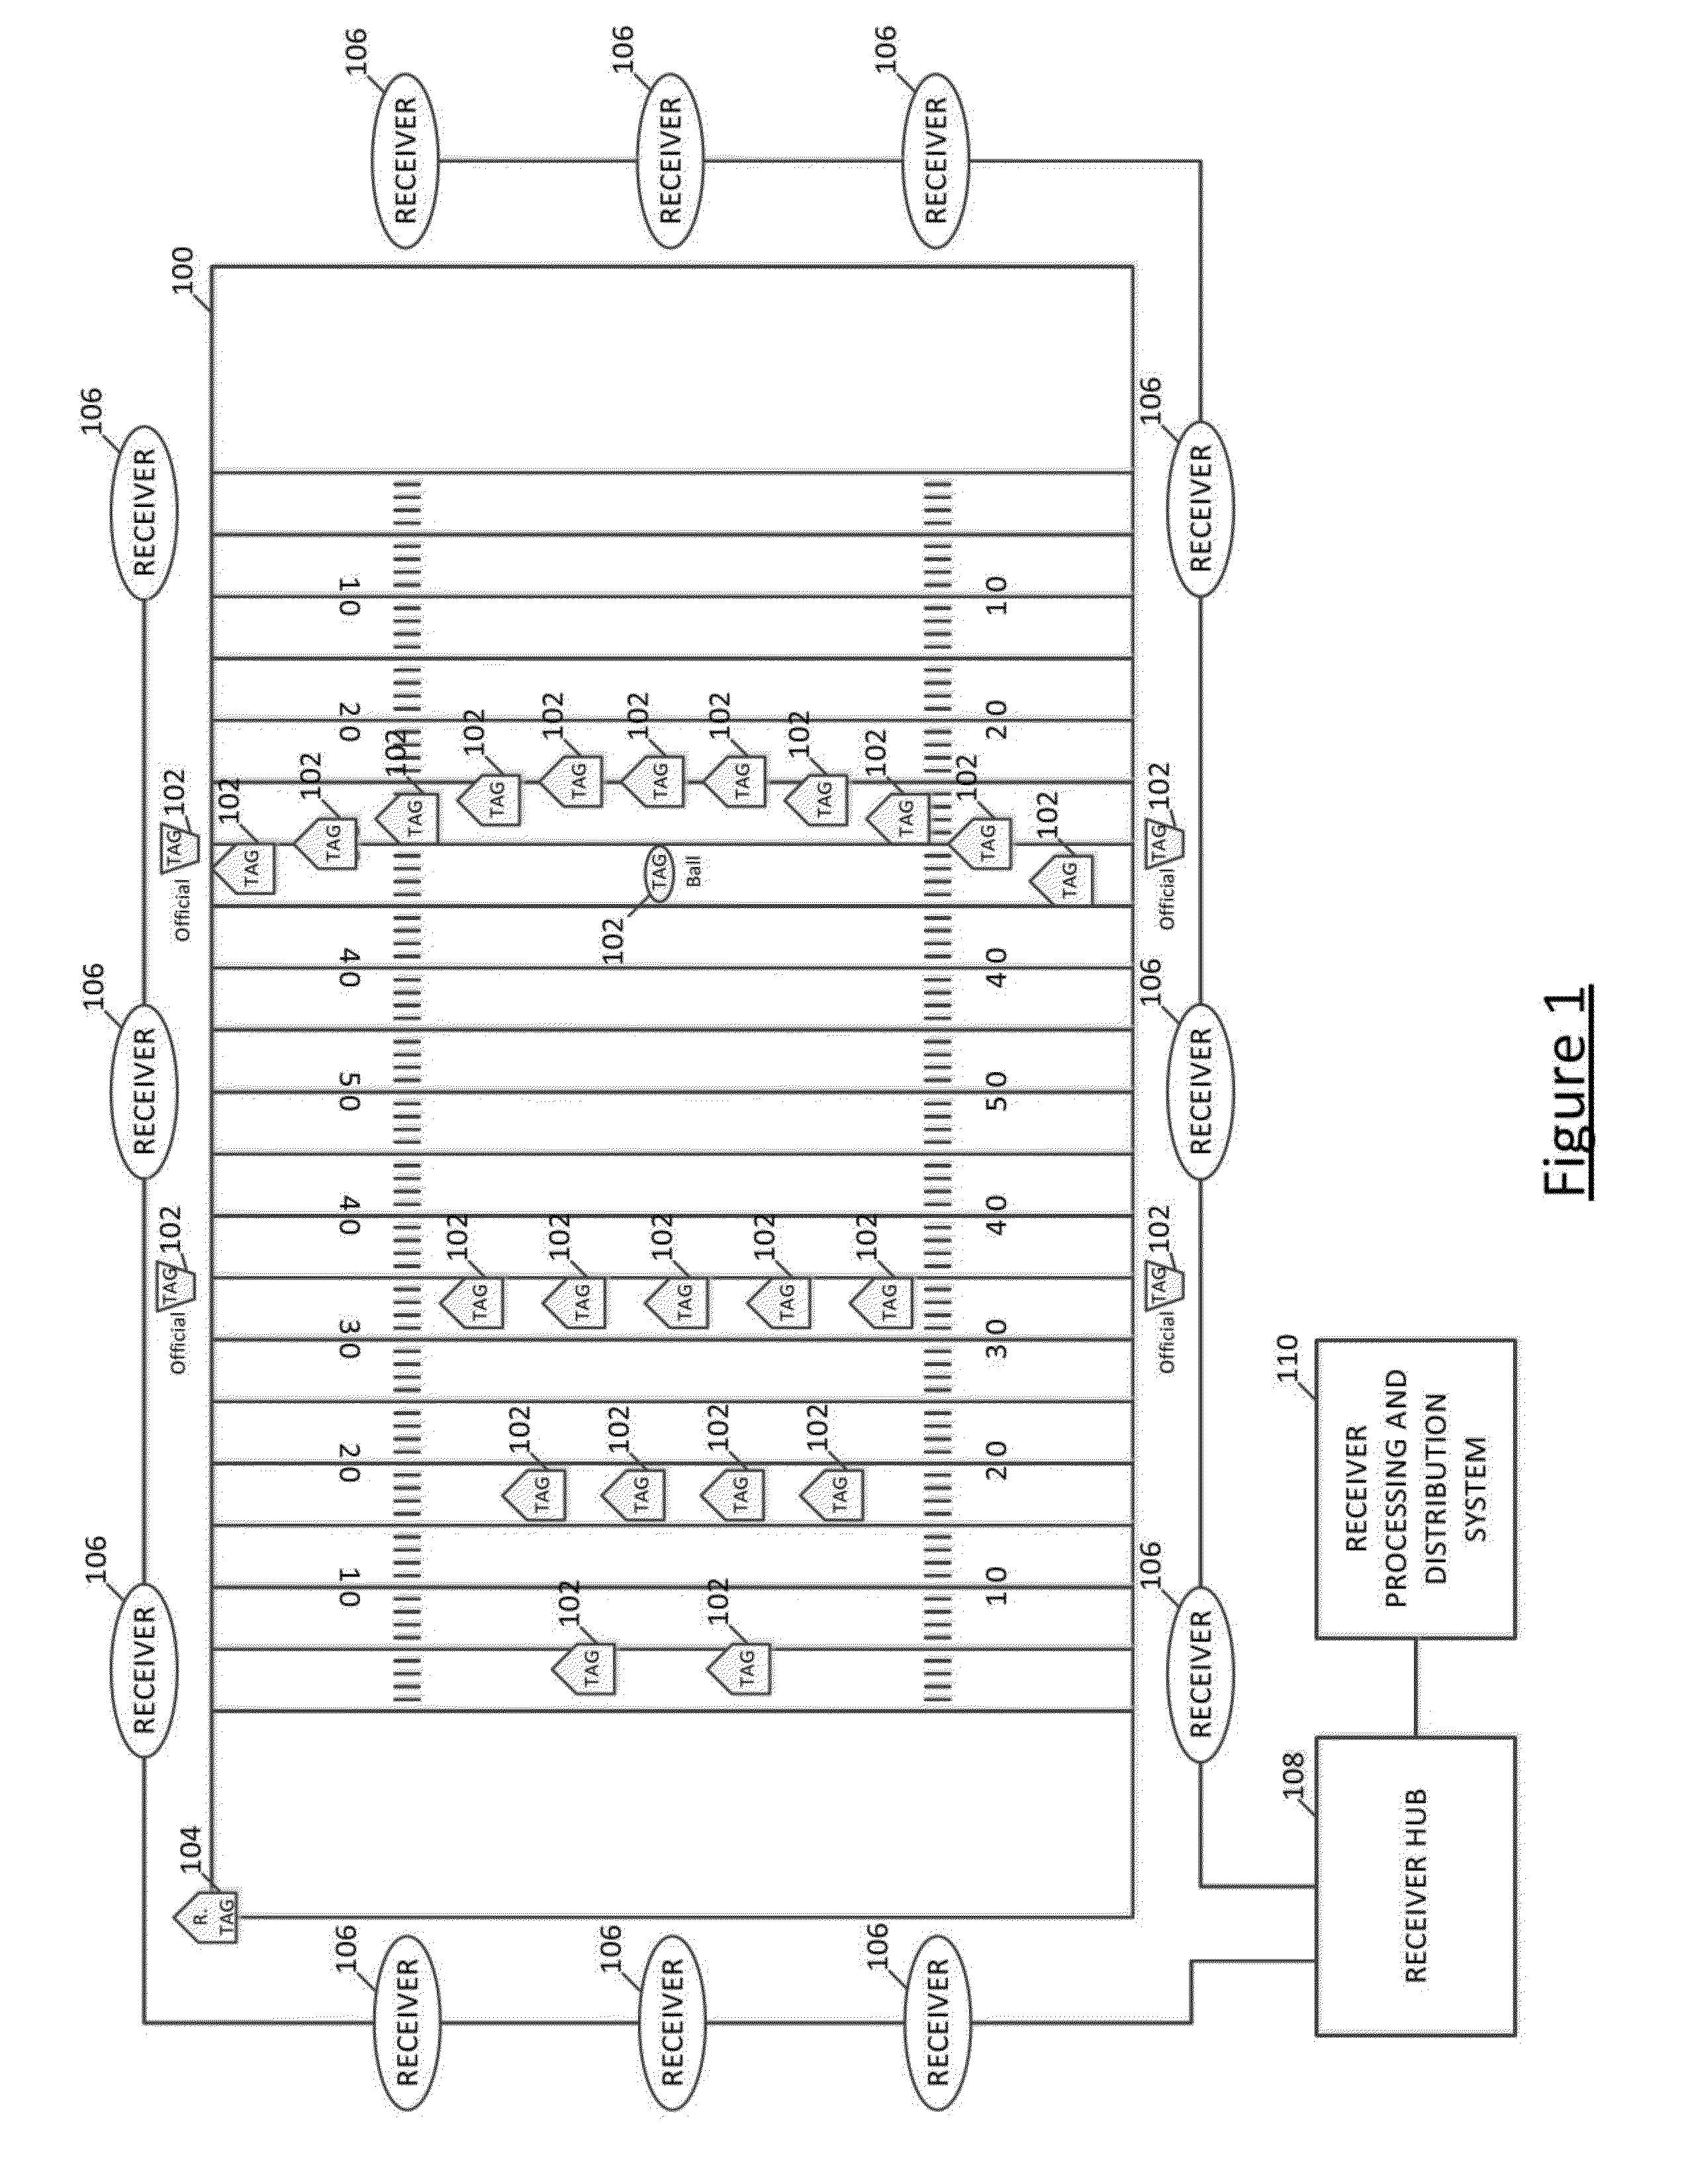 Method, apparatus, and computer program product for collecting and displaying sporting event data based on real time data for proximity and movement of objects